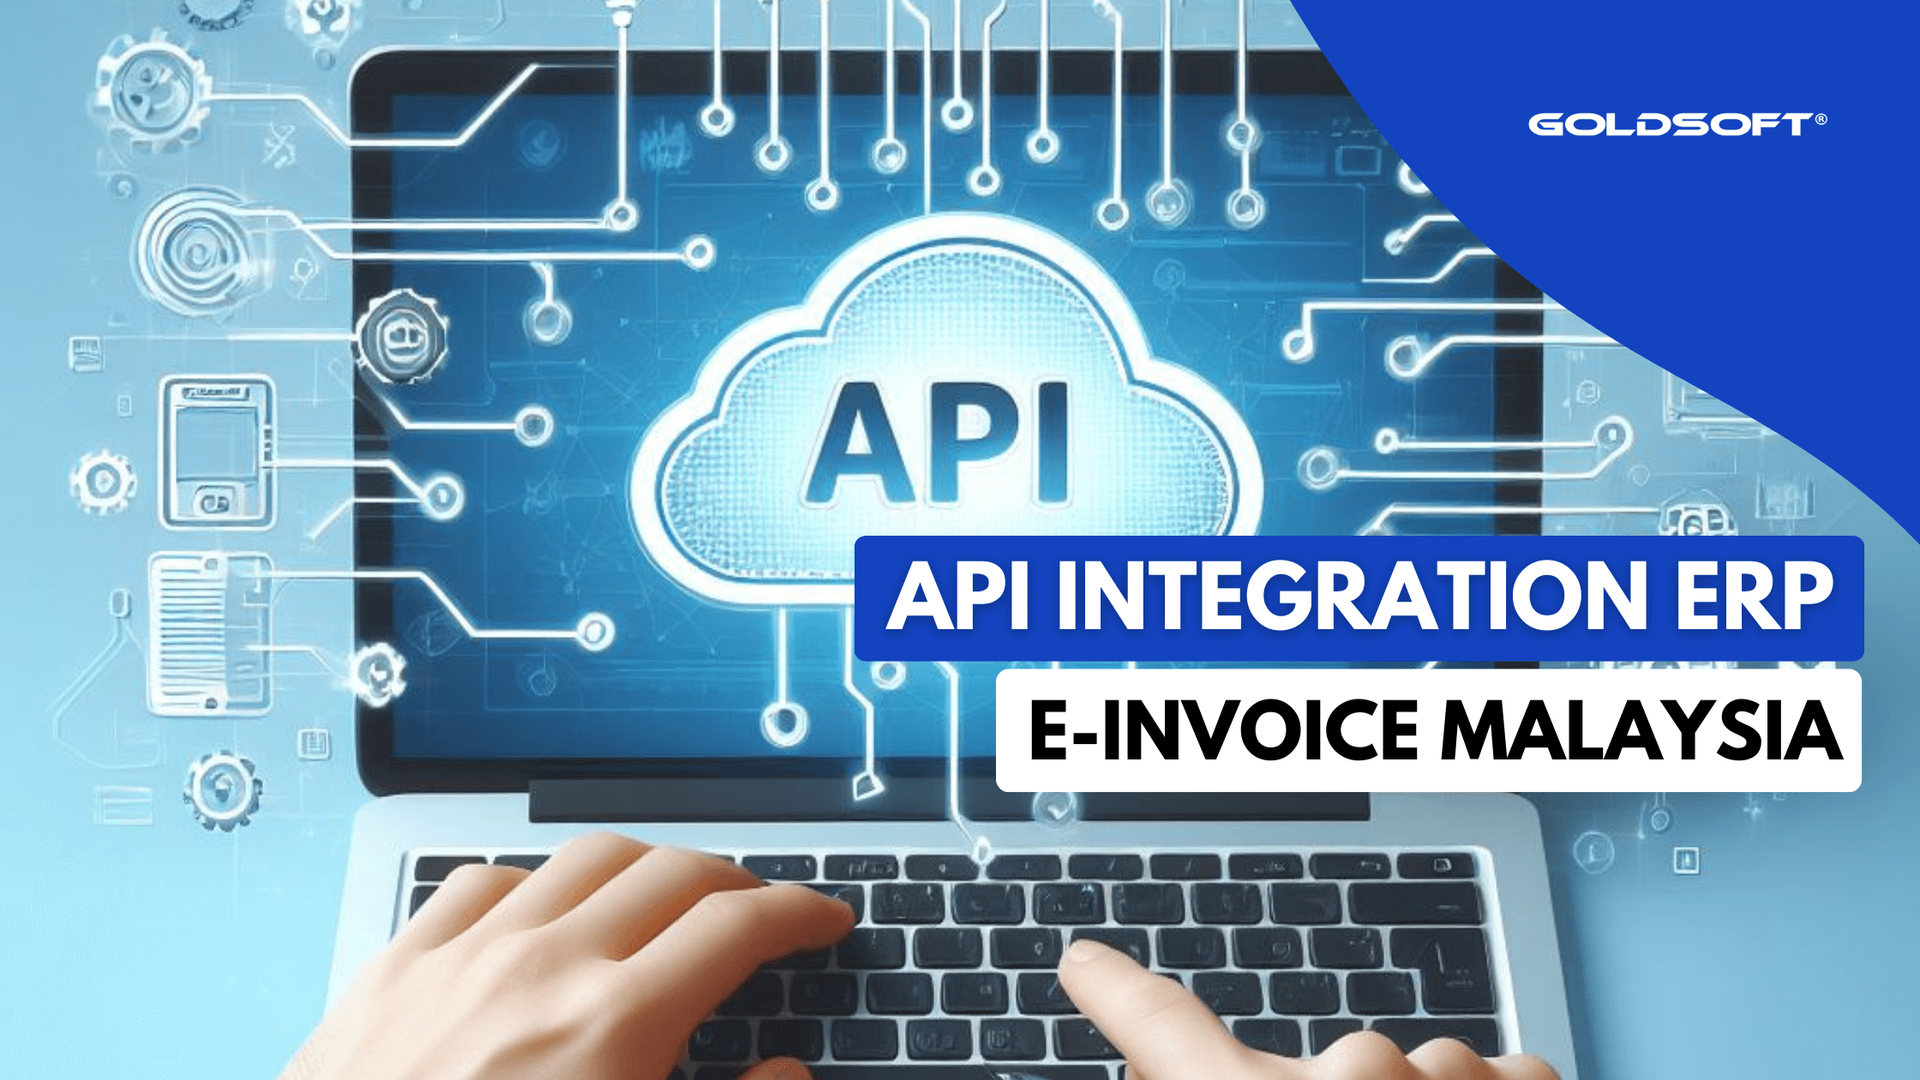 API connection from the Goldsoft ERP to the LHDN MyInvoice E-Invoice Portal.